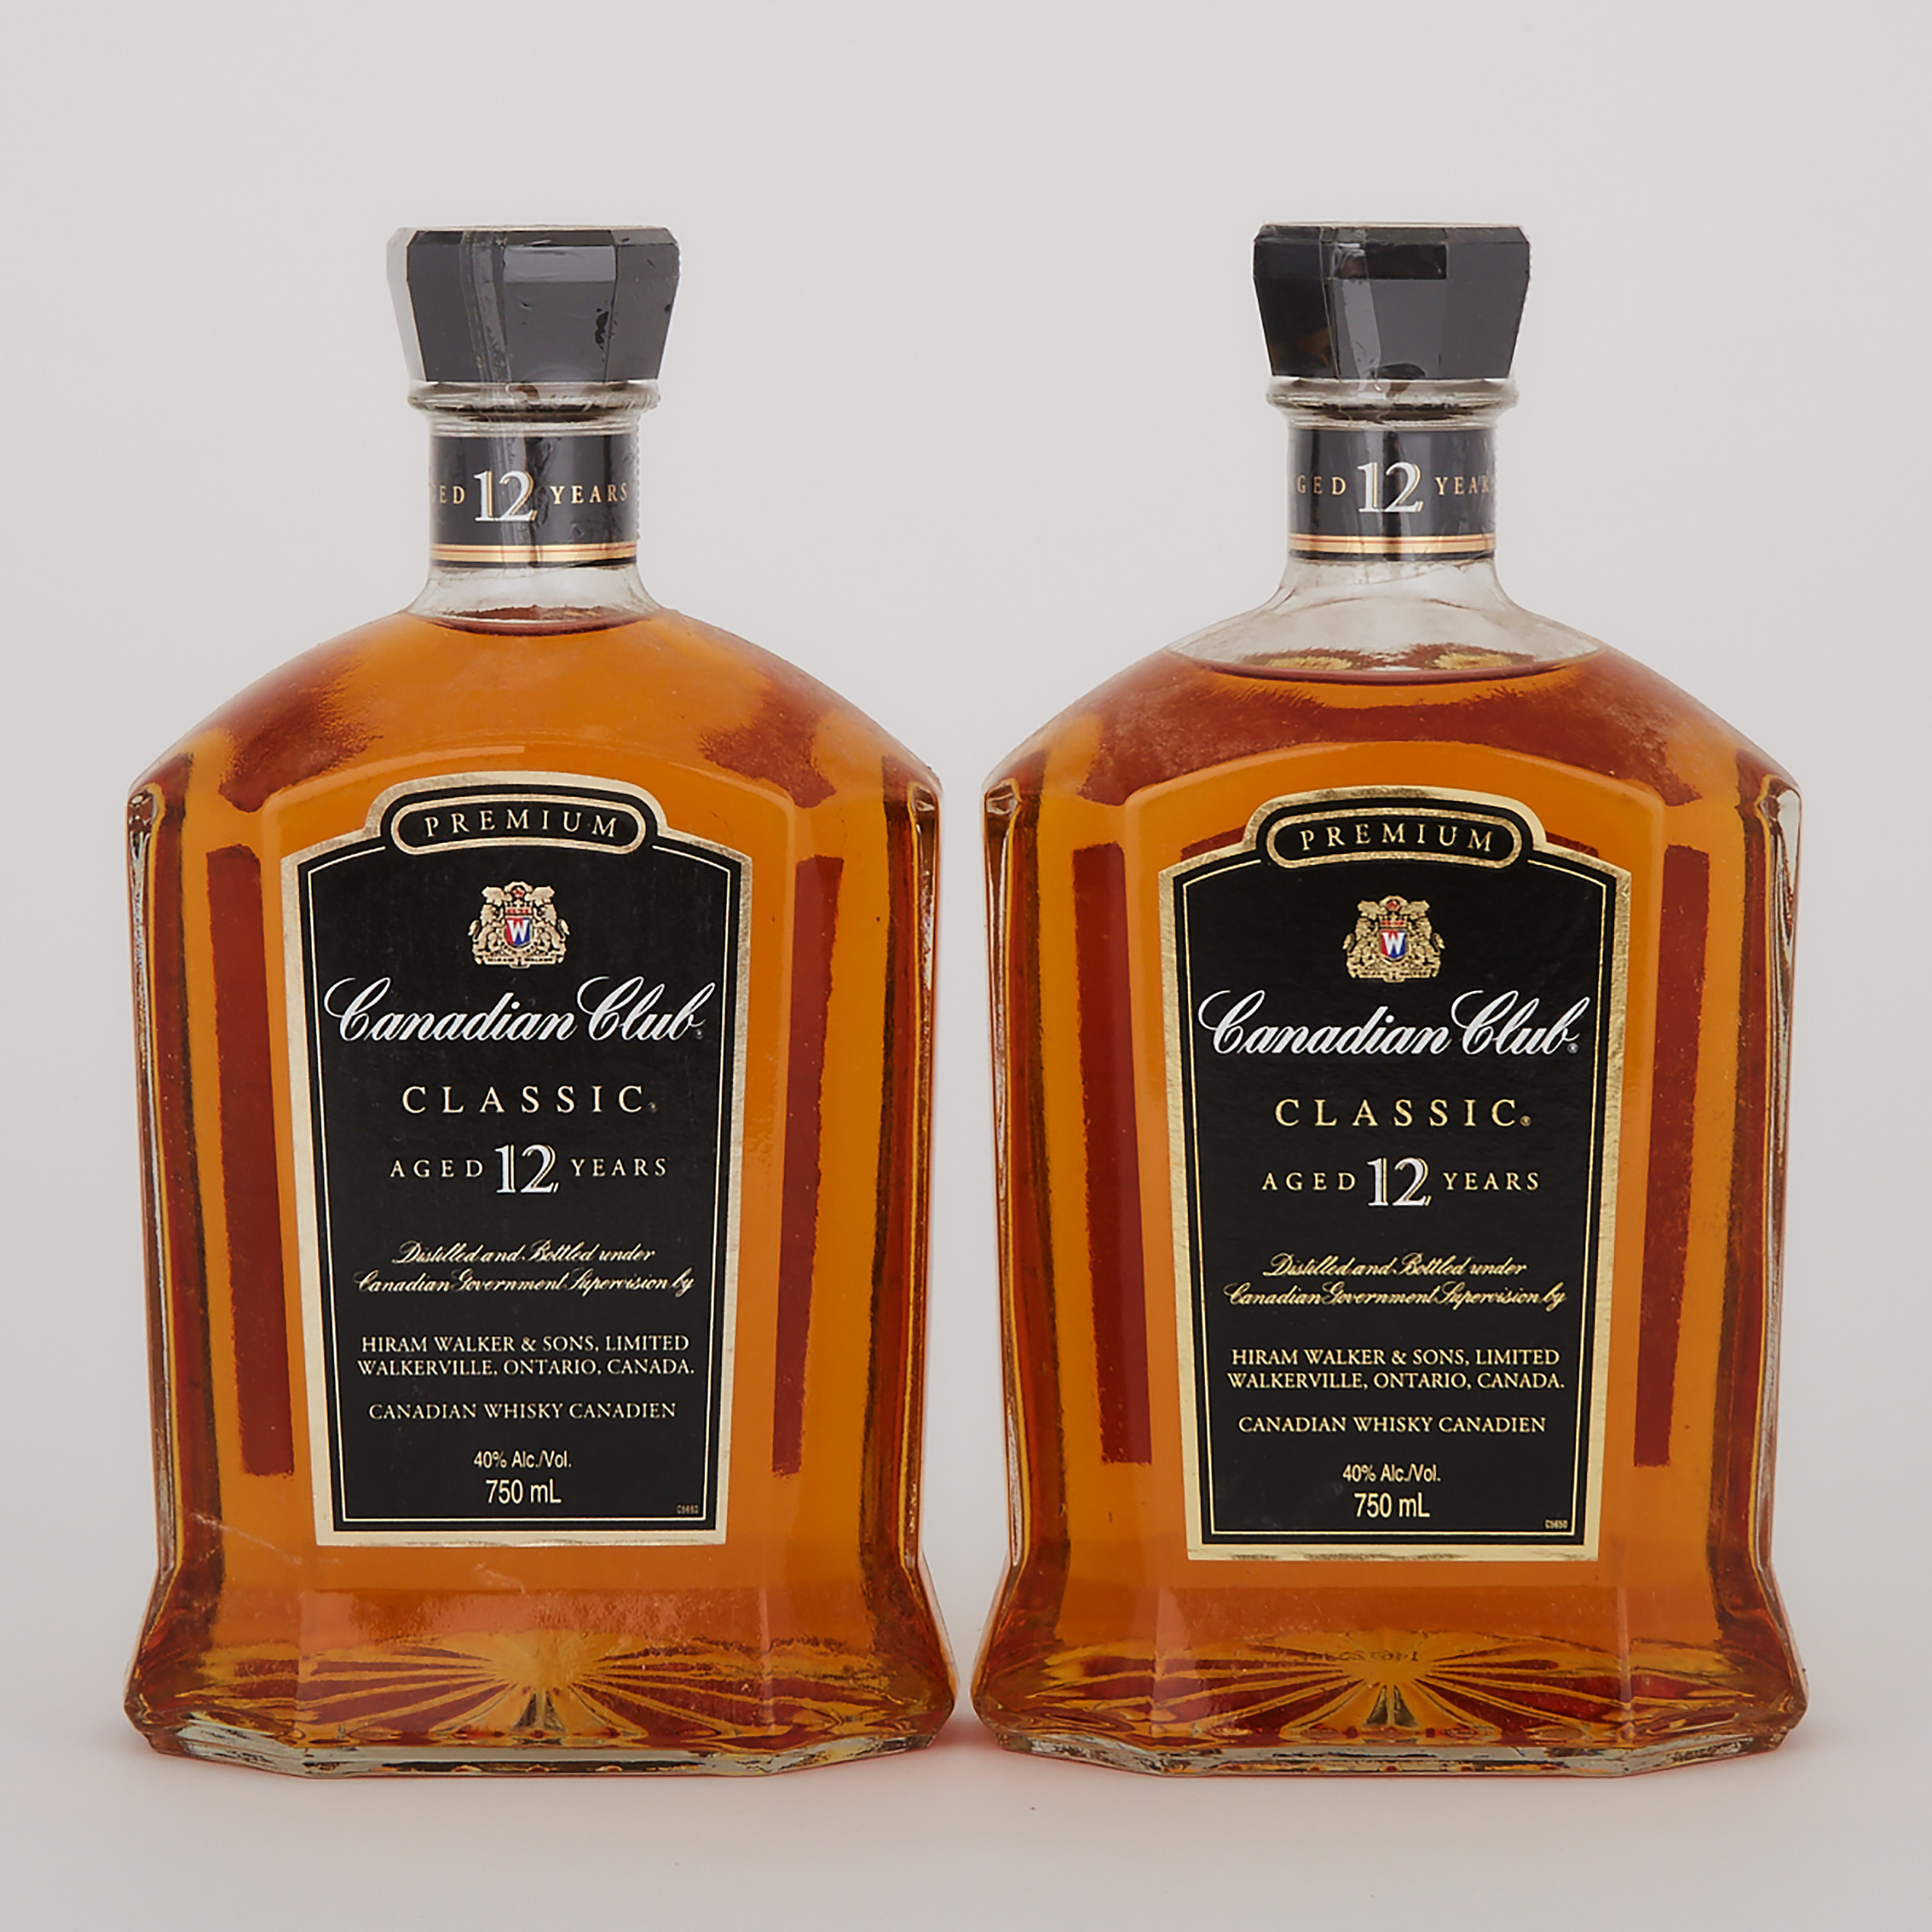 CANADIAN CLUB PREMIUM CLASSIC CANADIAN WHISKY 12 YEARS (TWO 750 ML)